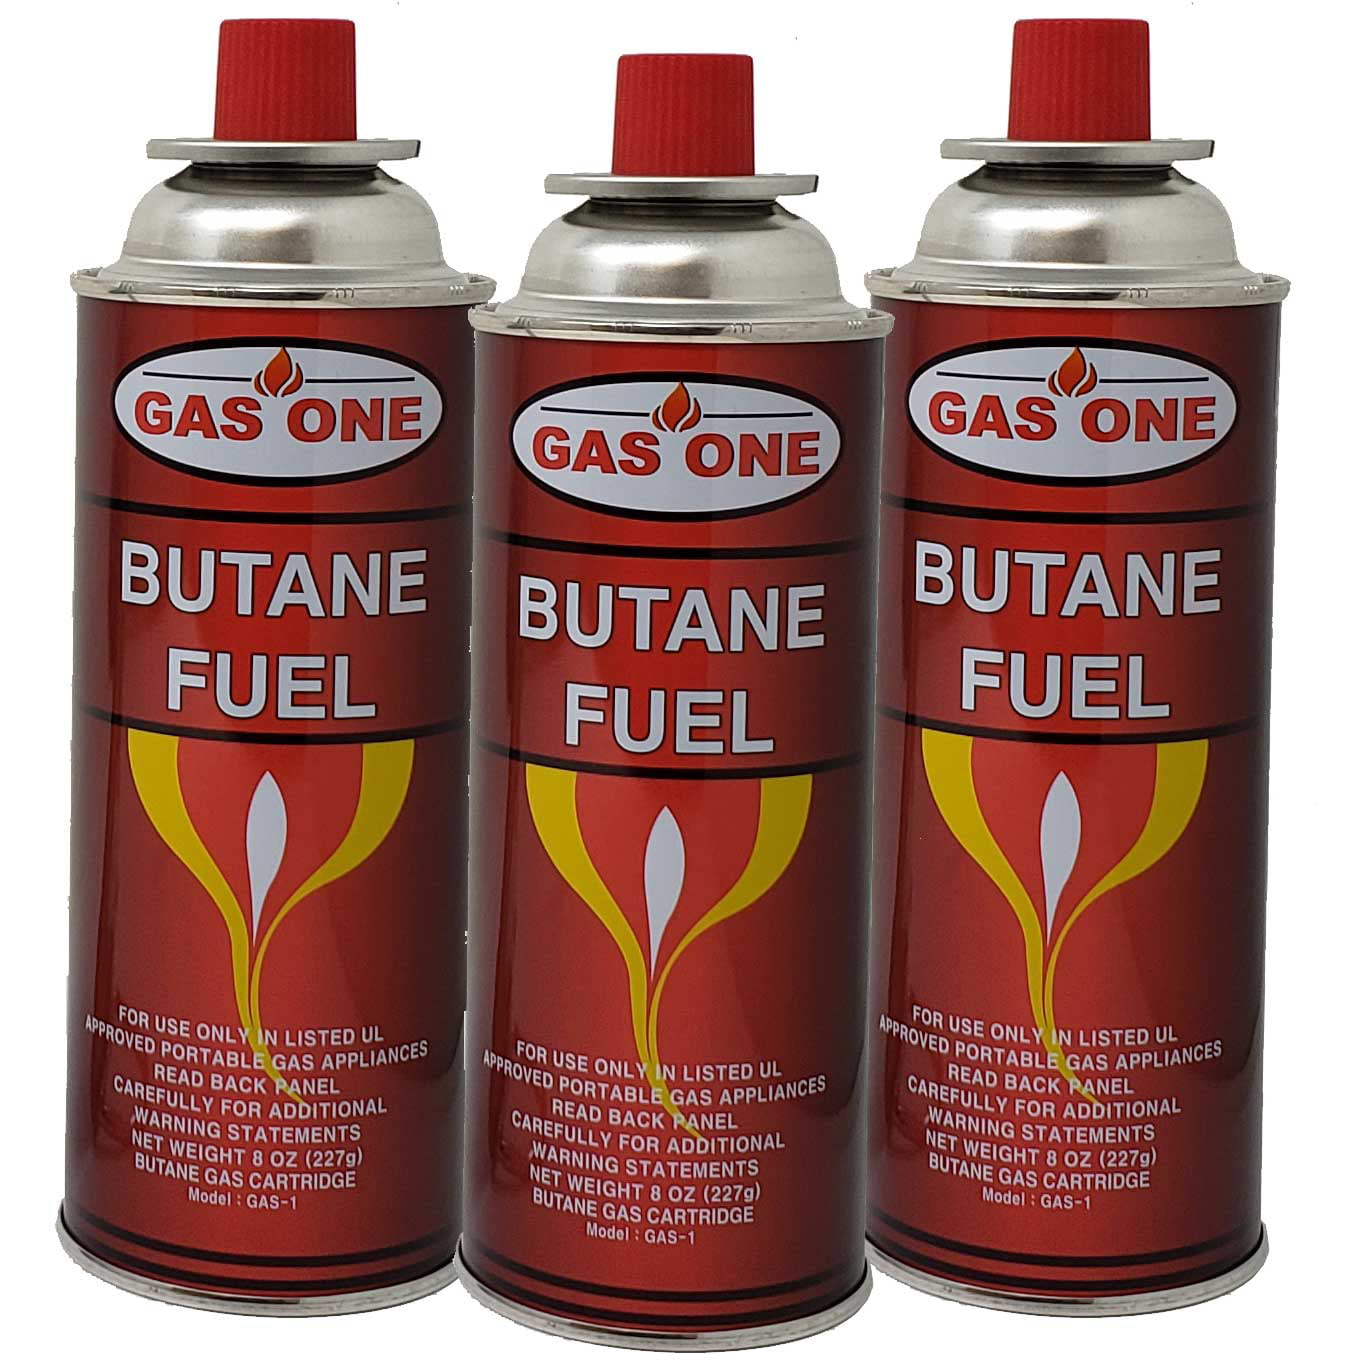 4 x BUTANE GAS BOTTLES CANISTERS FOR PORTABLE STOVES COOKERS GRILL HEATERS WEED 